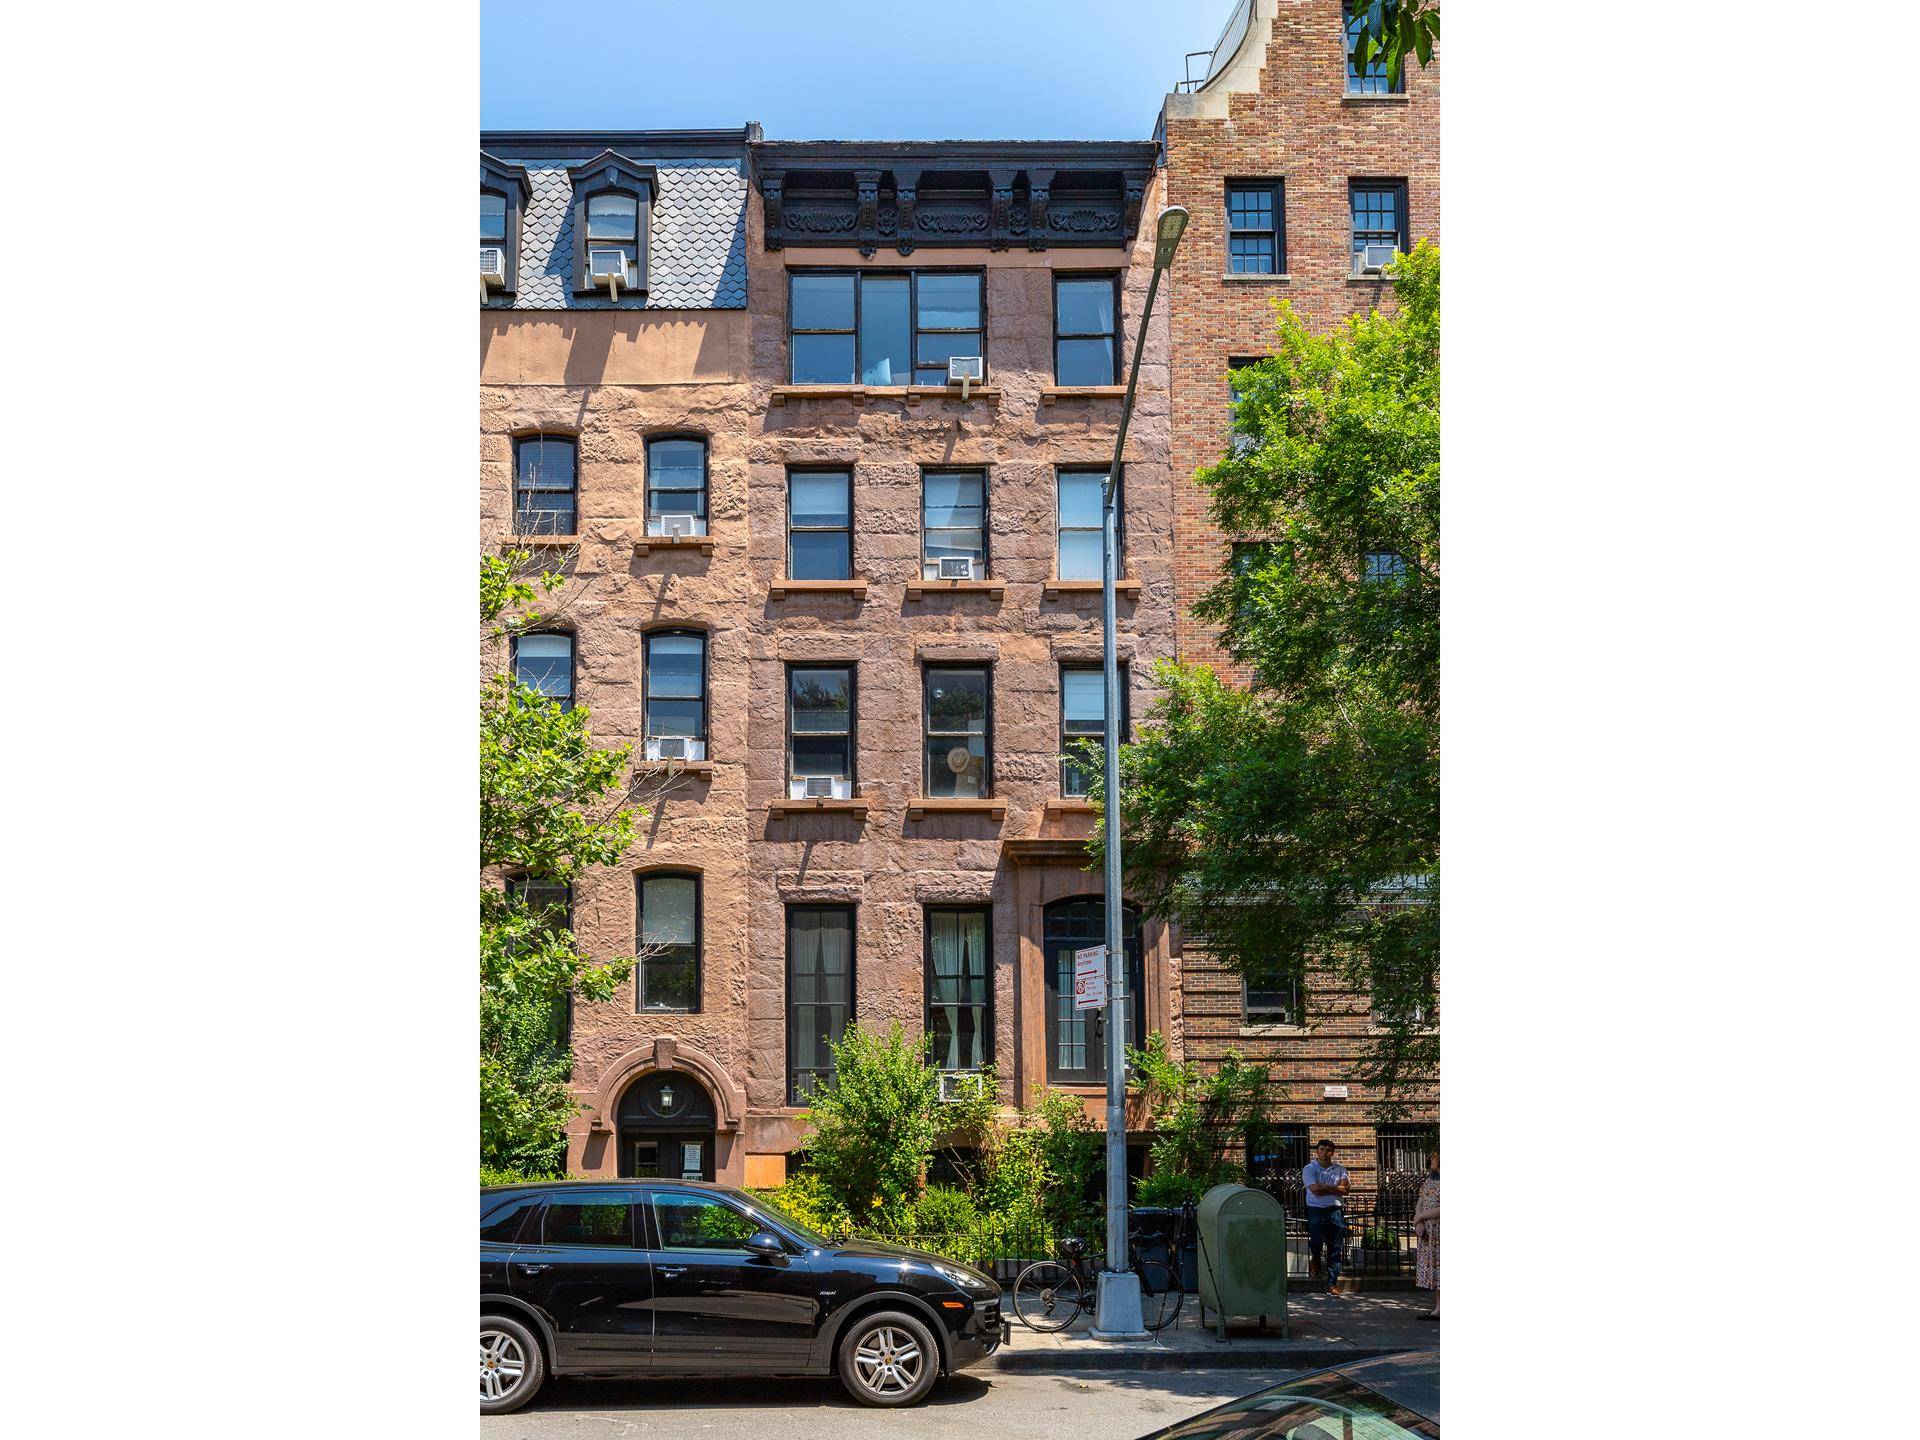 447 West 22nd Street is a 100 free market, six unit multifamily townhouse property located in the heart of the West Chelsea neighborhood of Manhattan.